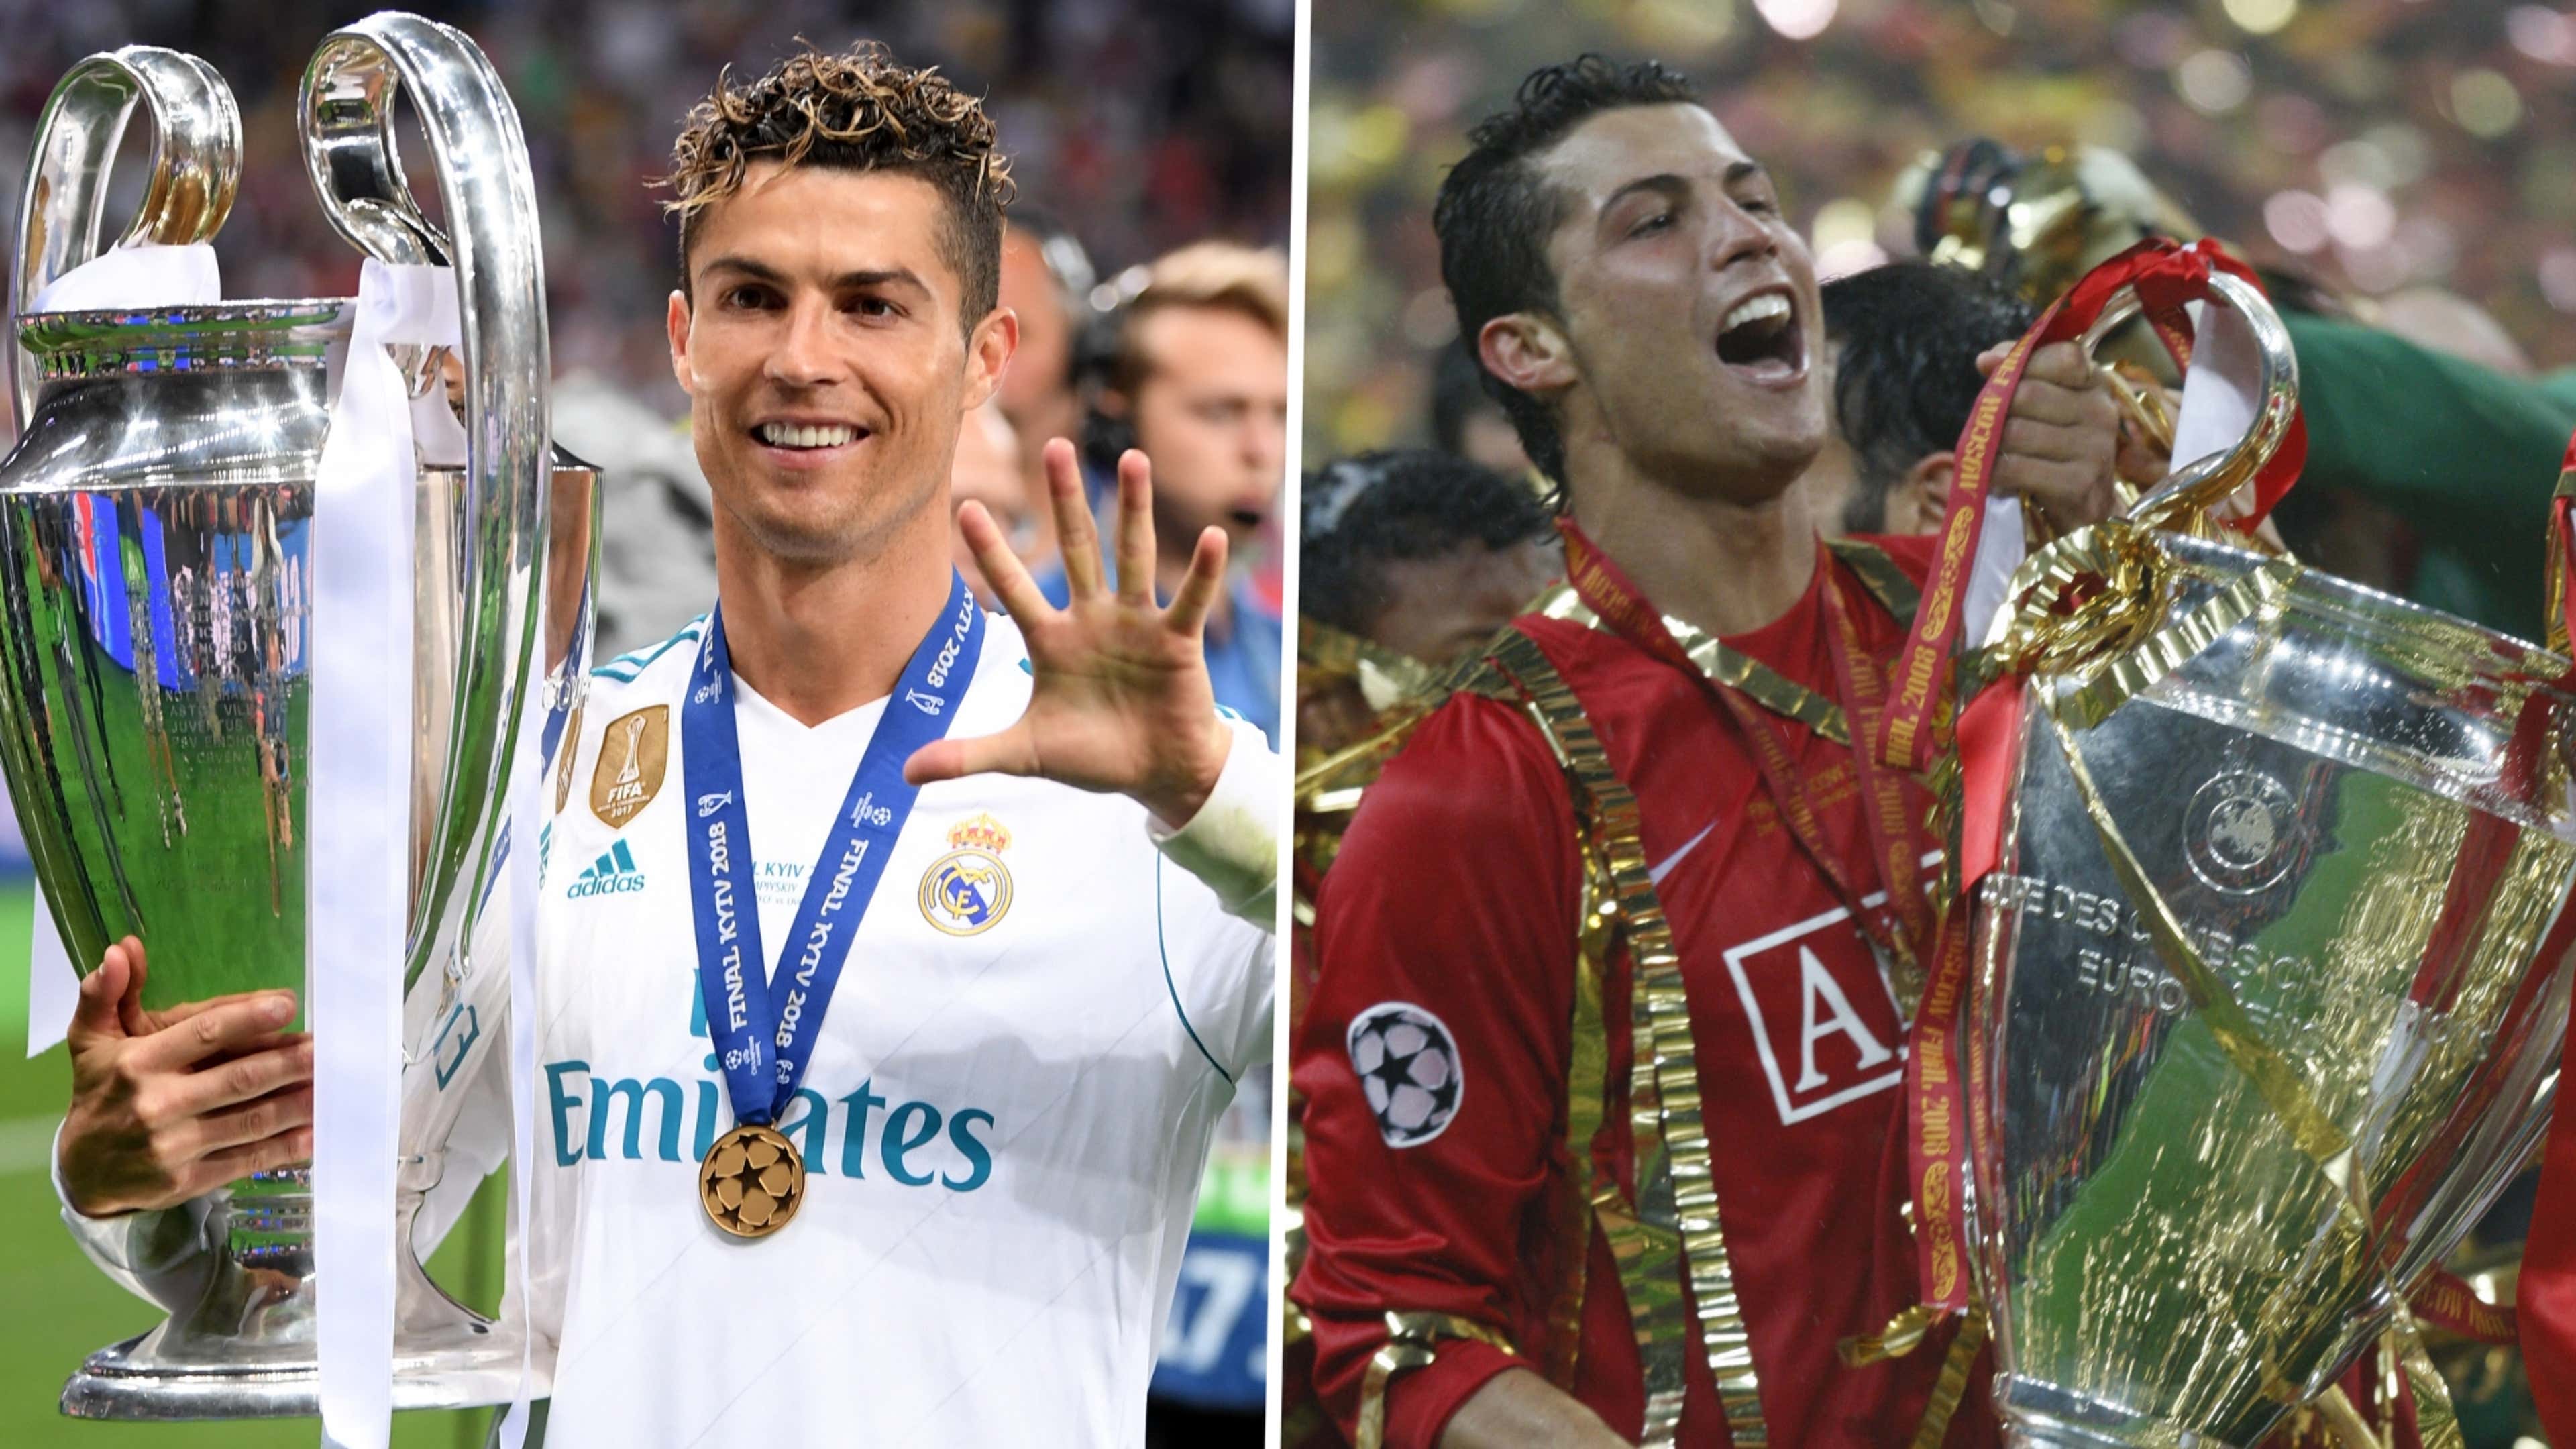 12 players who have won the UEFA Champions League with multiple clubs